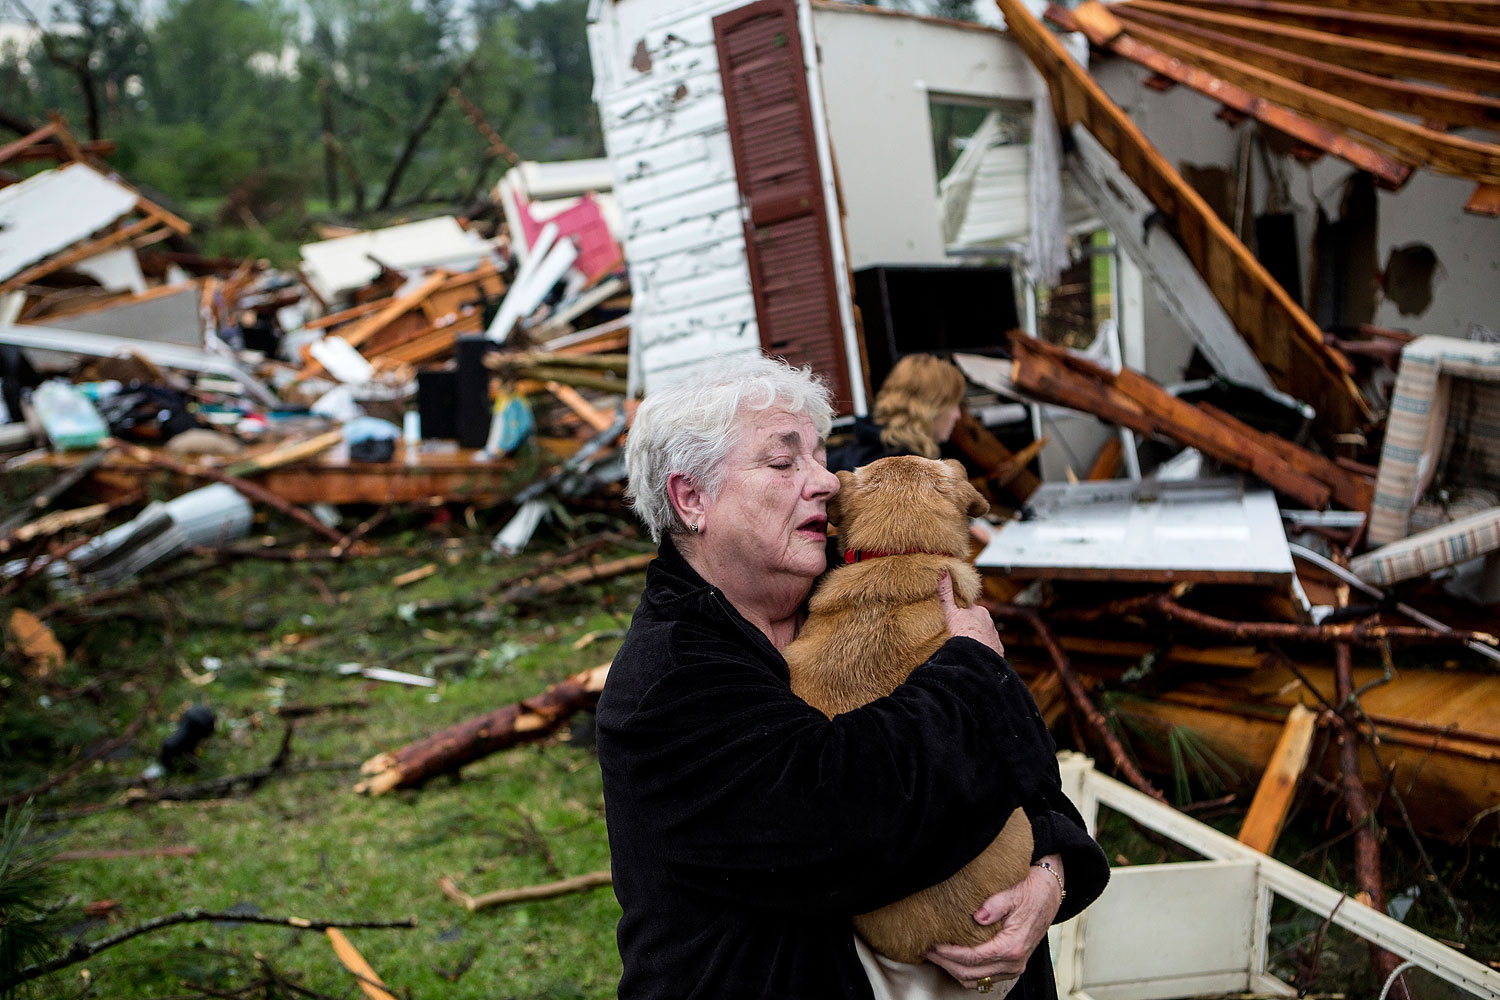 Constance Lambert embraces her dog after finding it alive when returning to her destroyed home in Tupelo, Miss., April 28, 2014. (Brad Vest—AP)